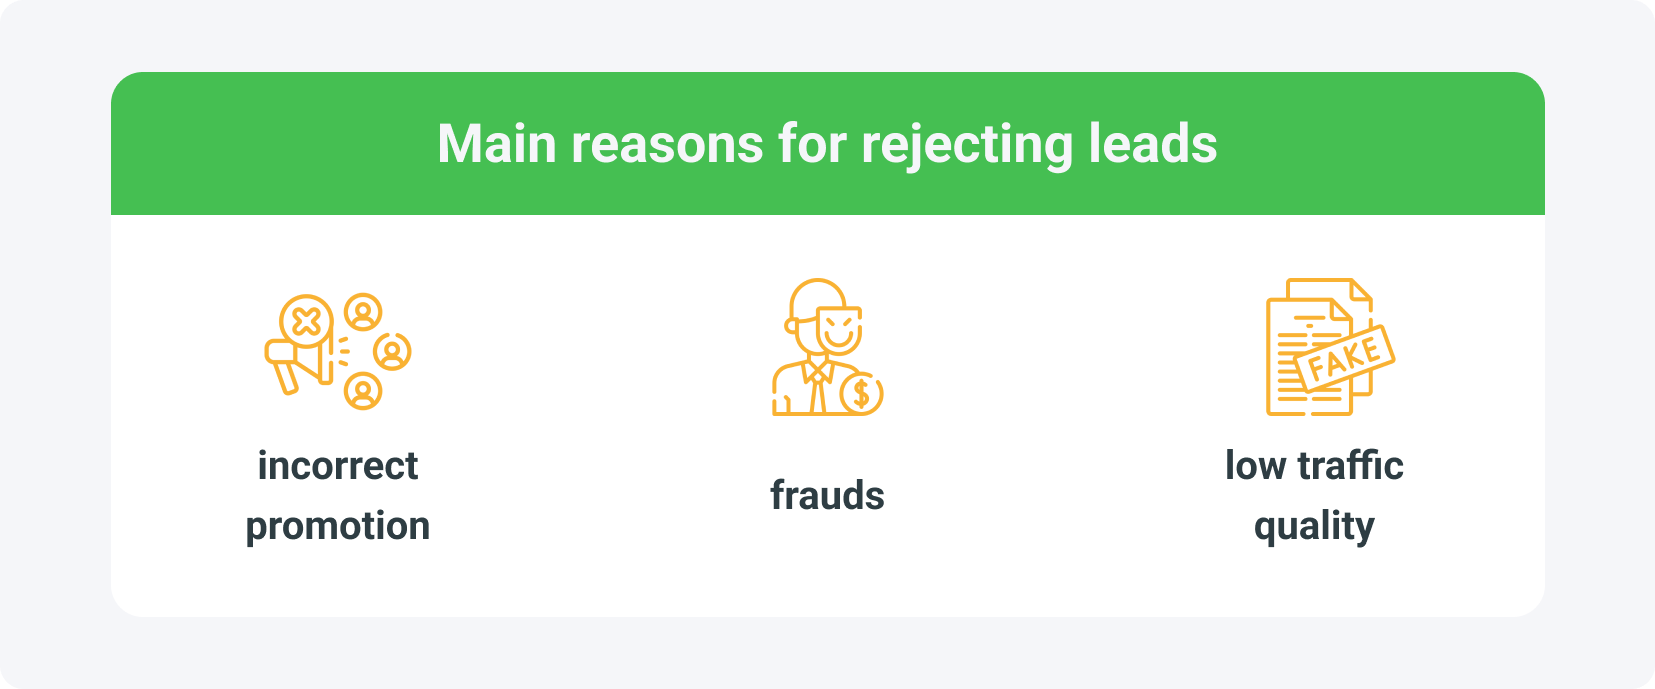 The main reasons for rejecting leads are frauds, incorrect promotion and low traffic quality.